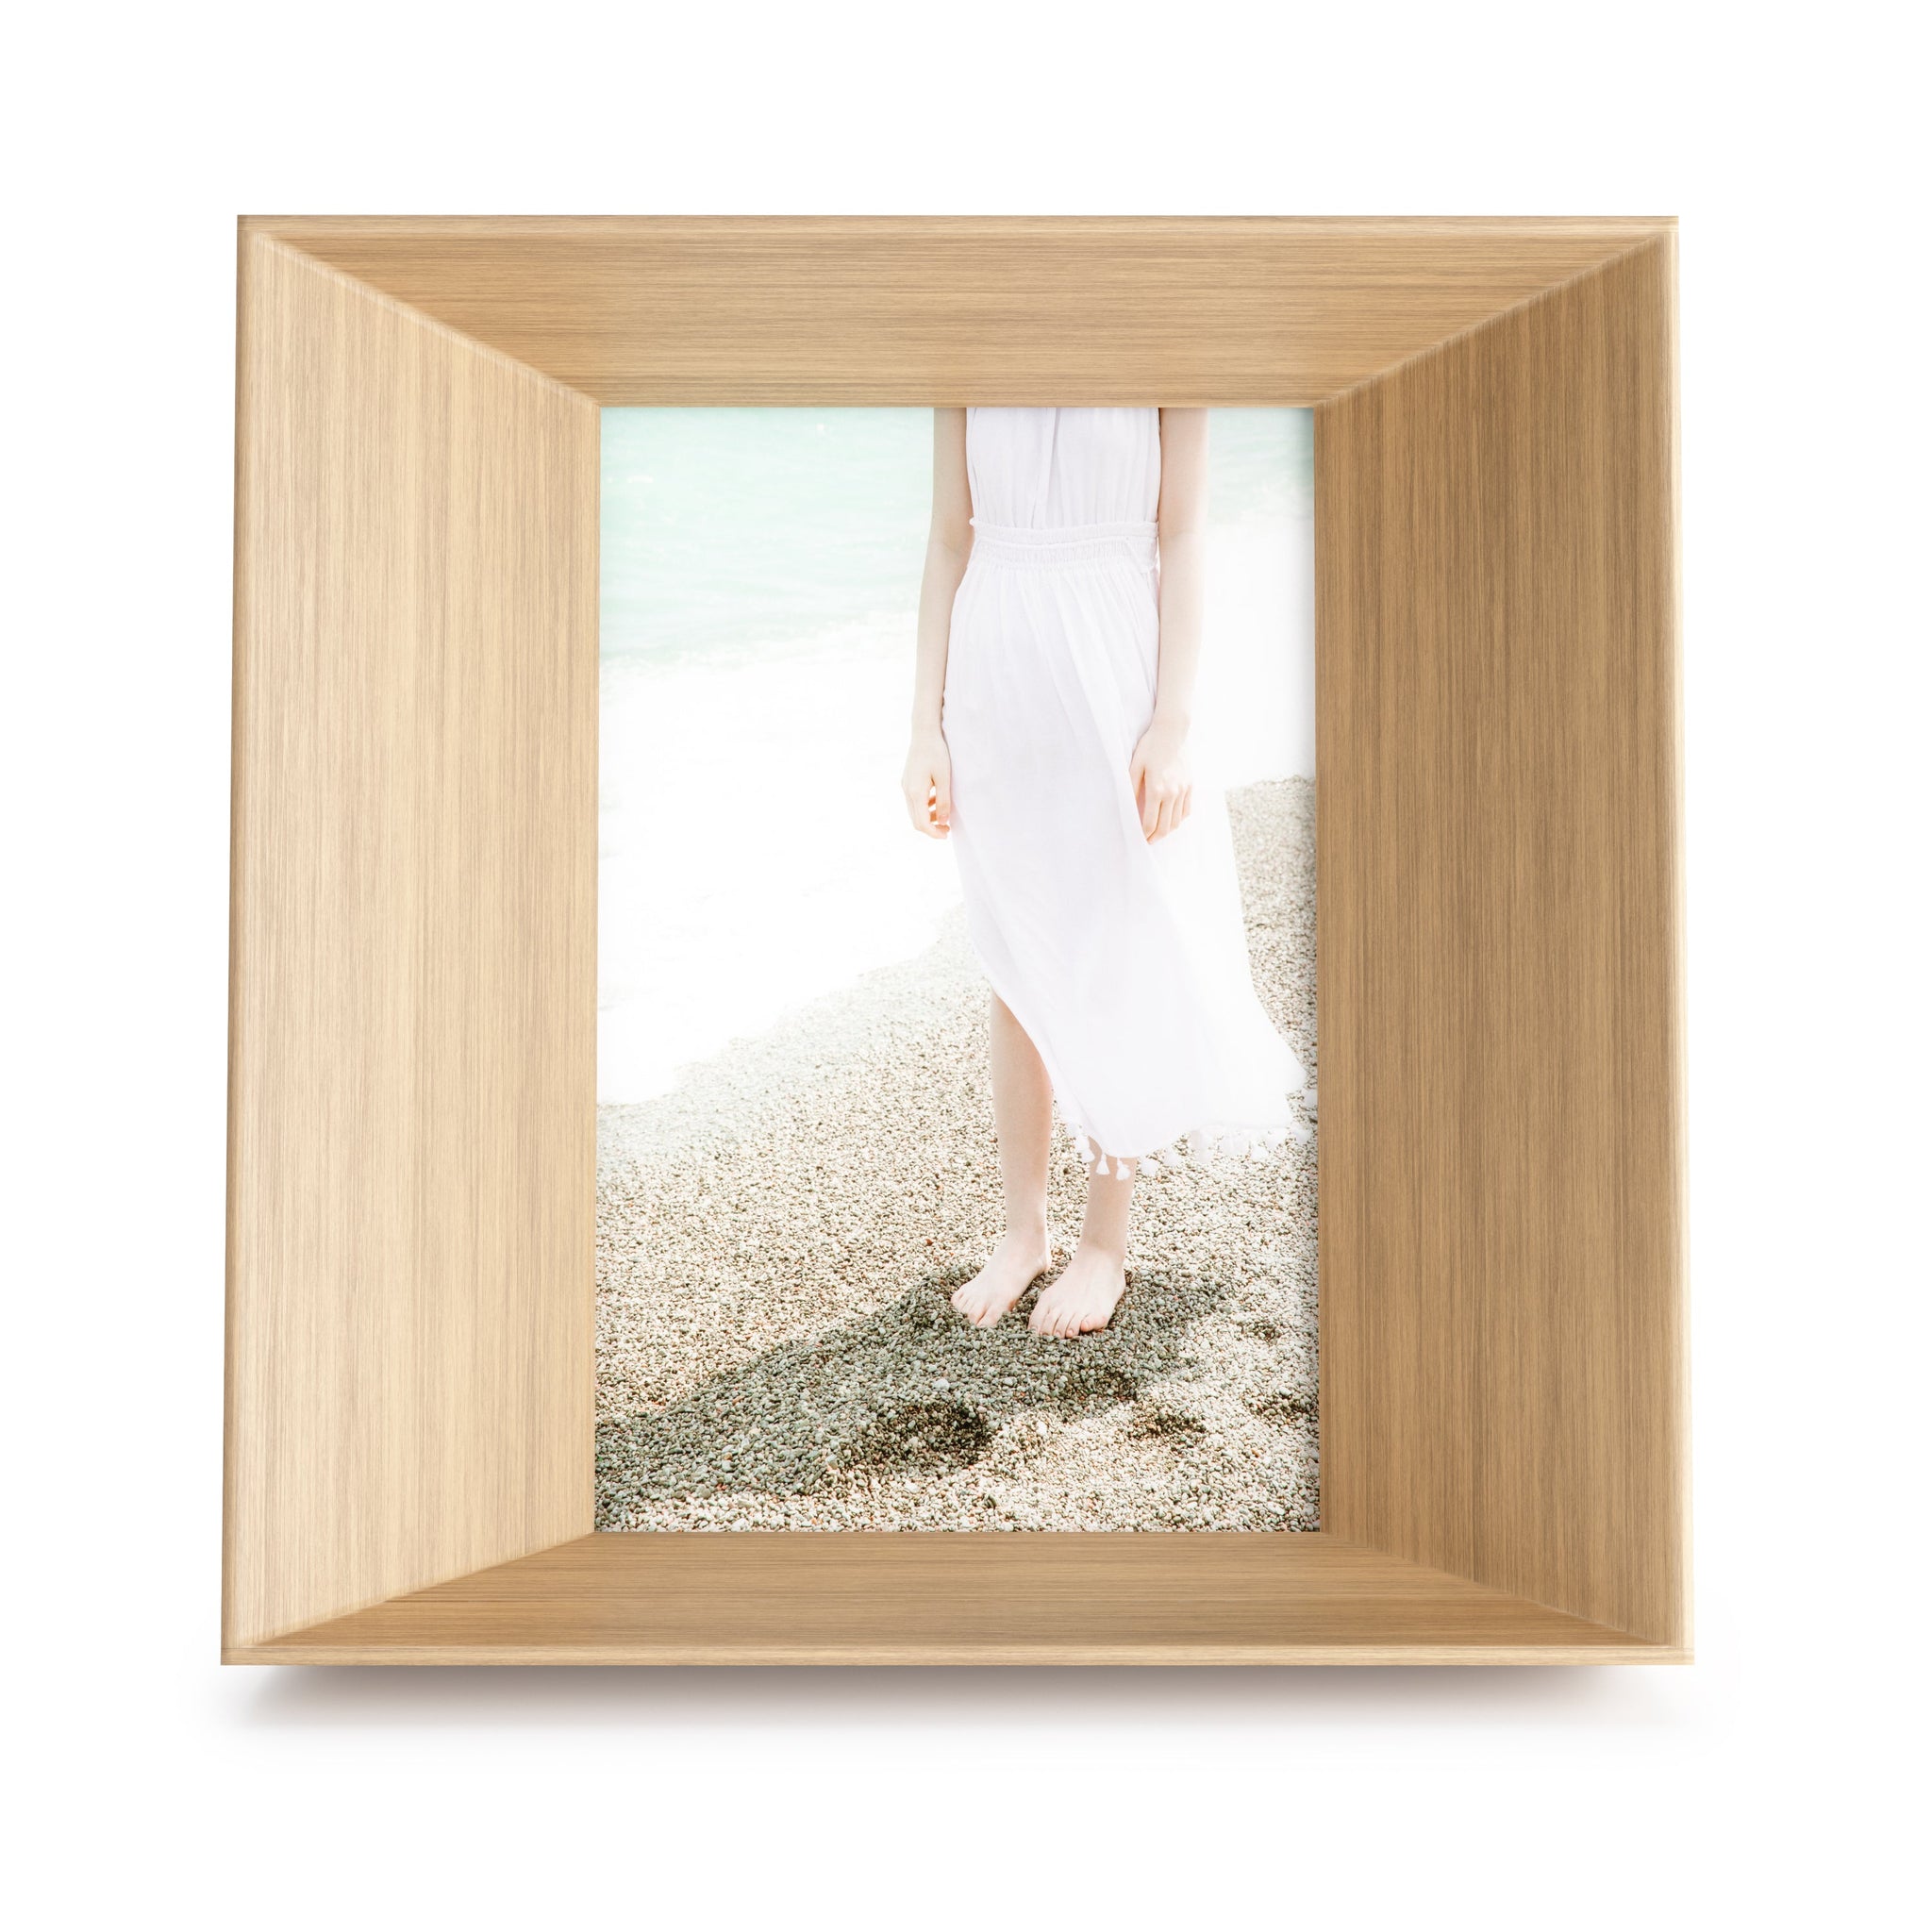 Lookout Picture Frame